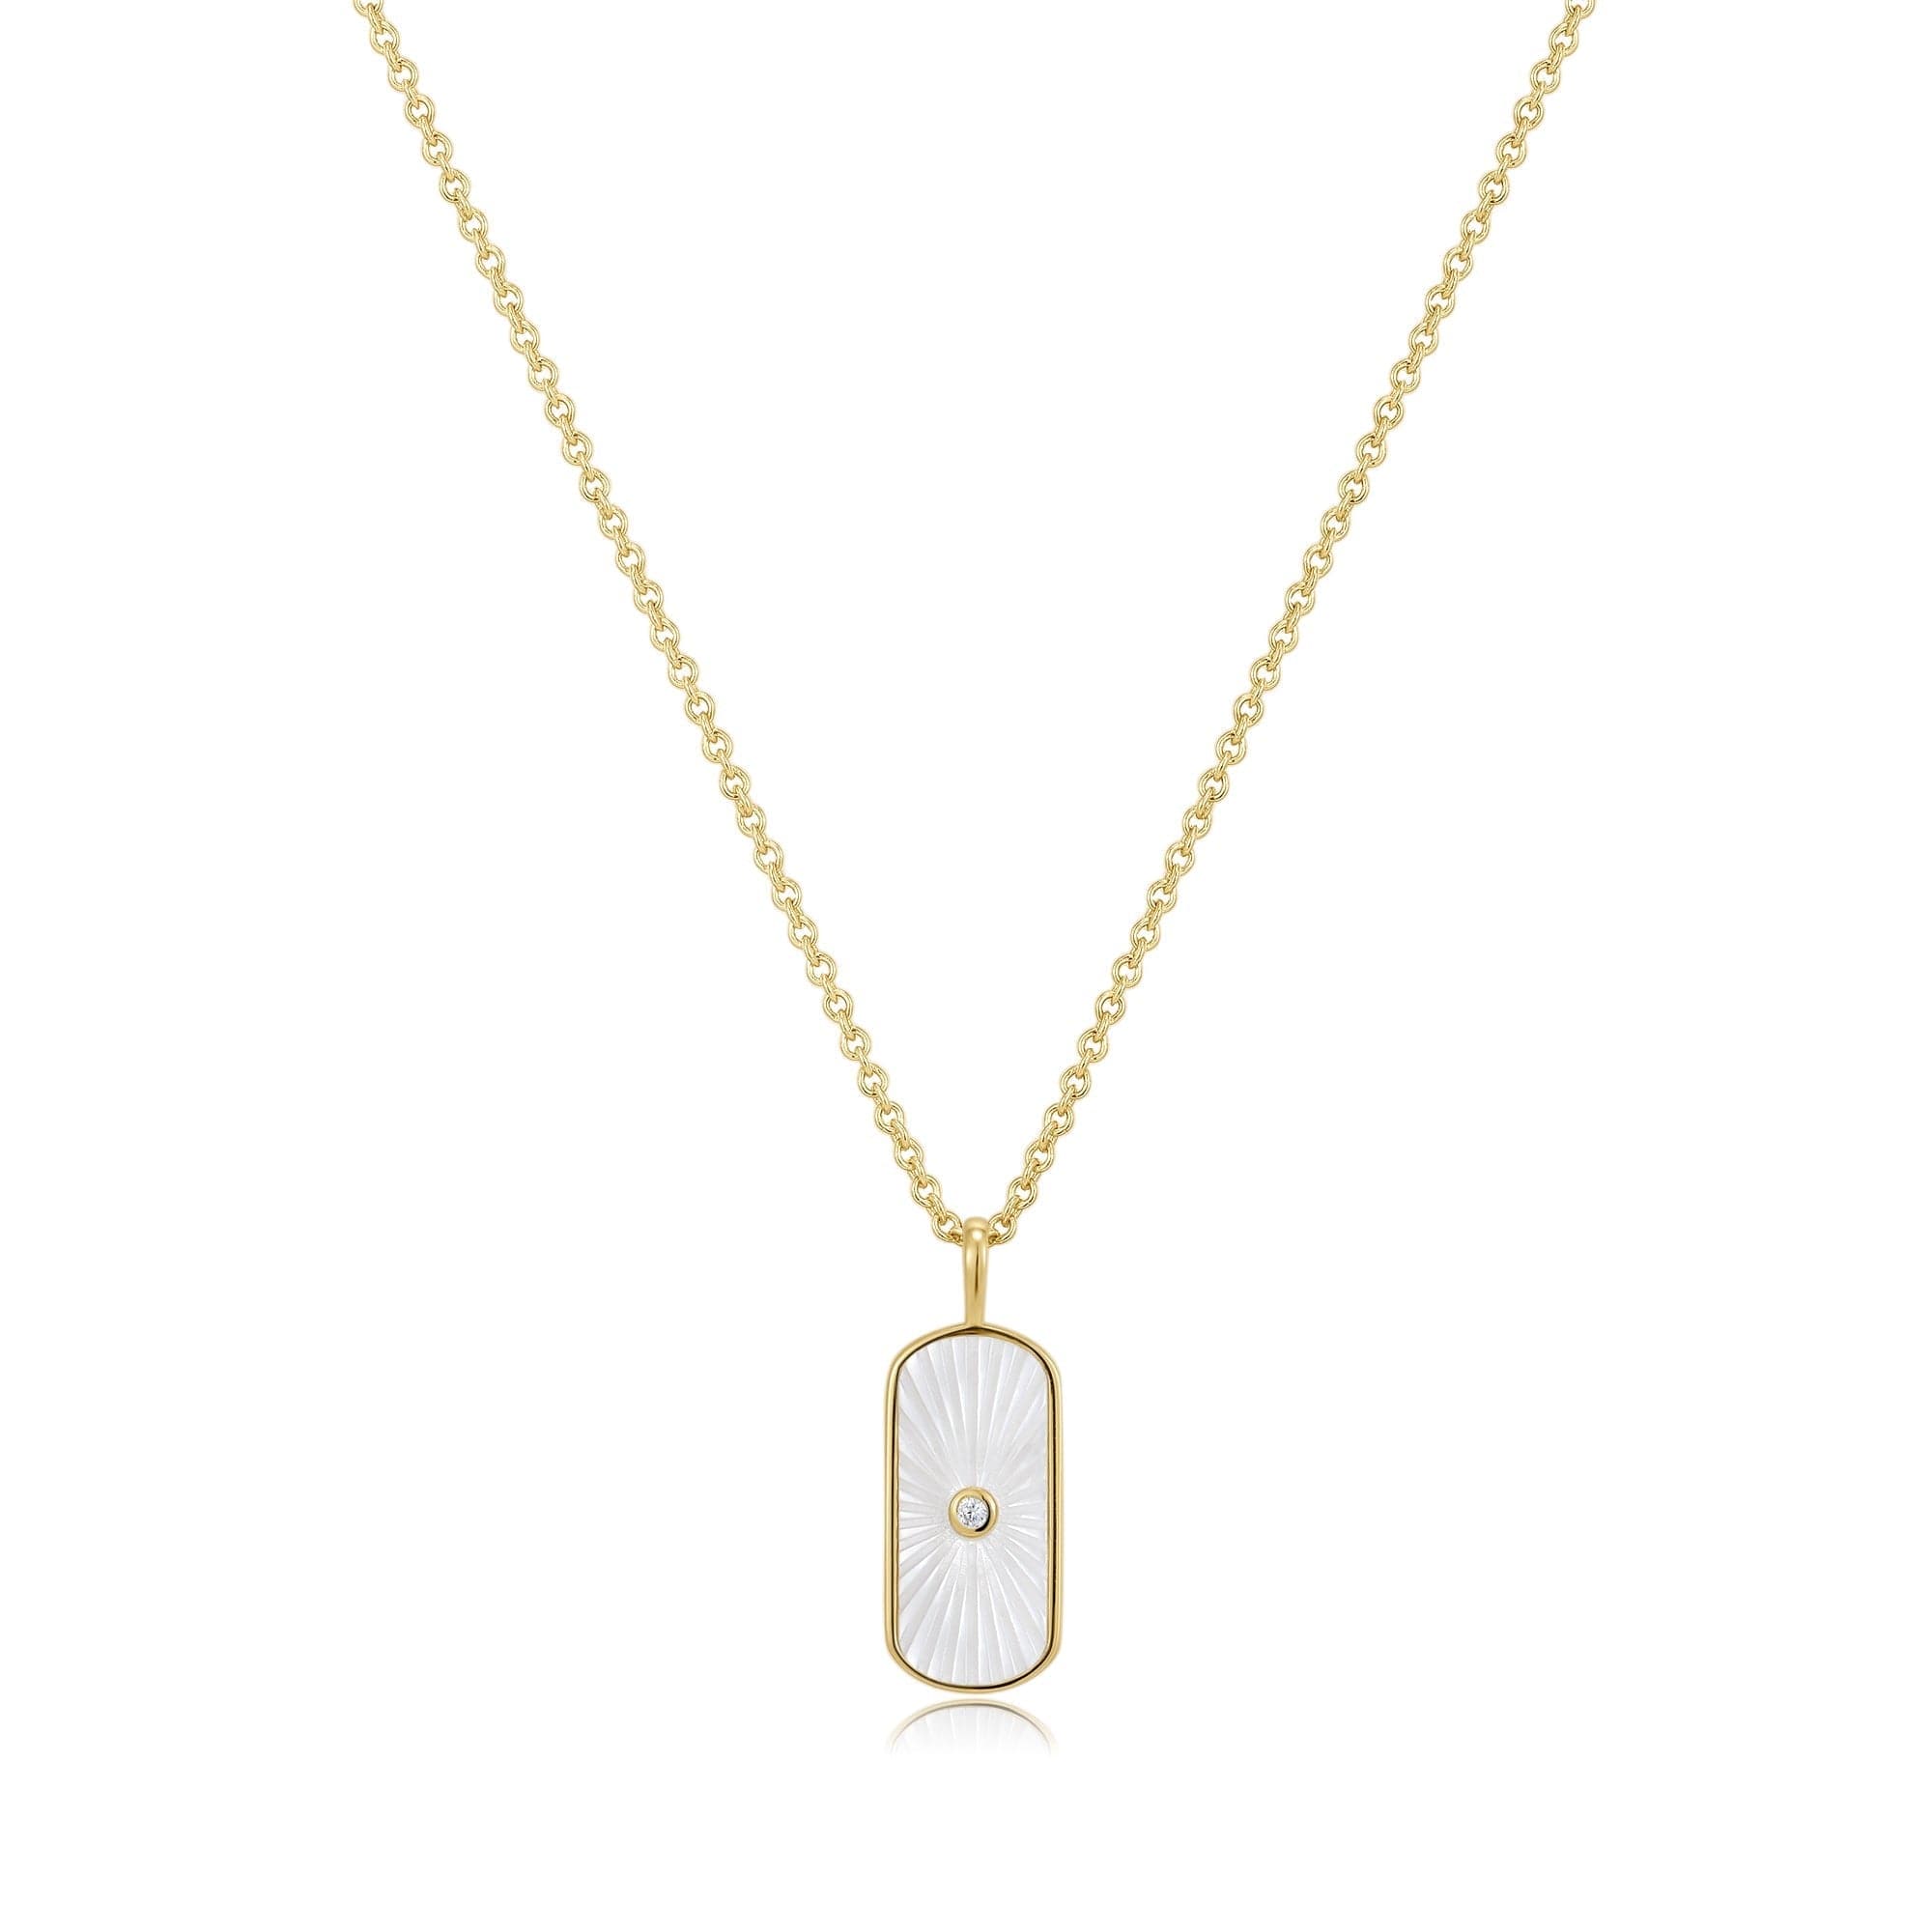 TAG SHAPED MOP PENDANT WITH CZ STONE NECKLACE